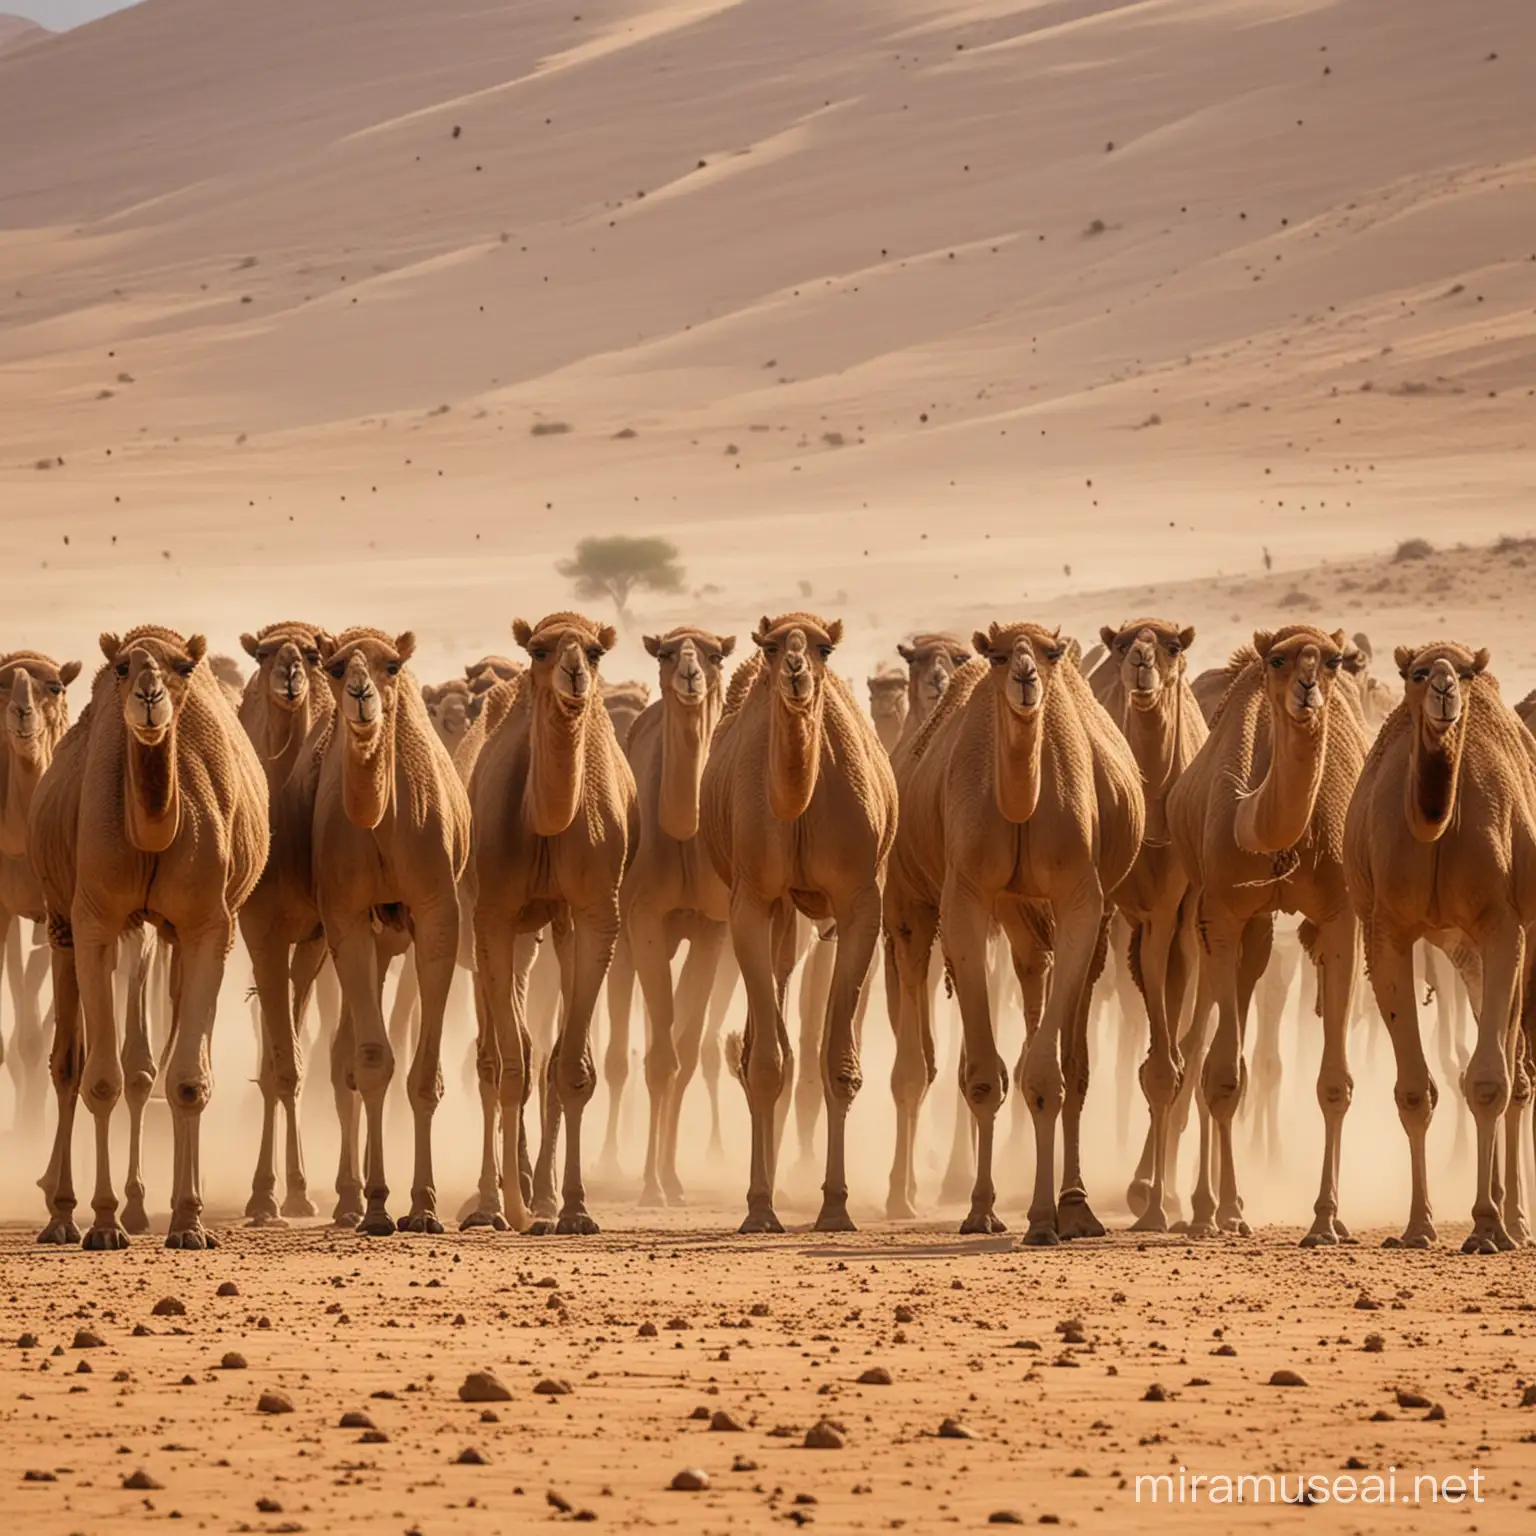 FleaInfested Camels Marching Towards a Giant Anus